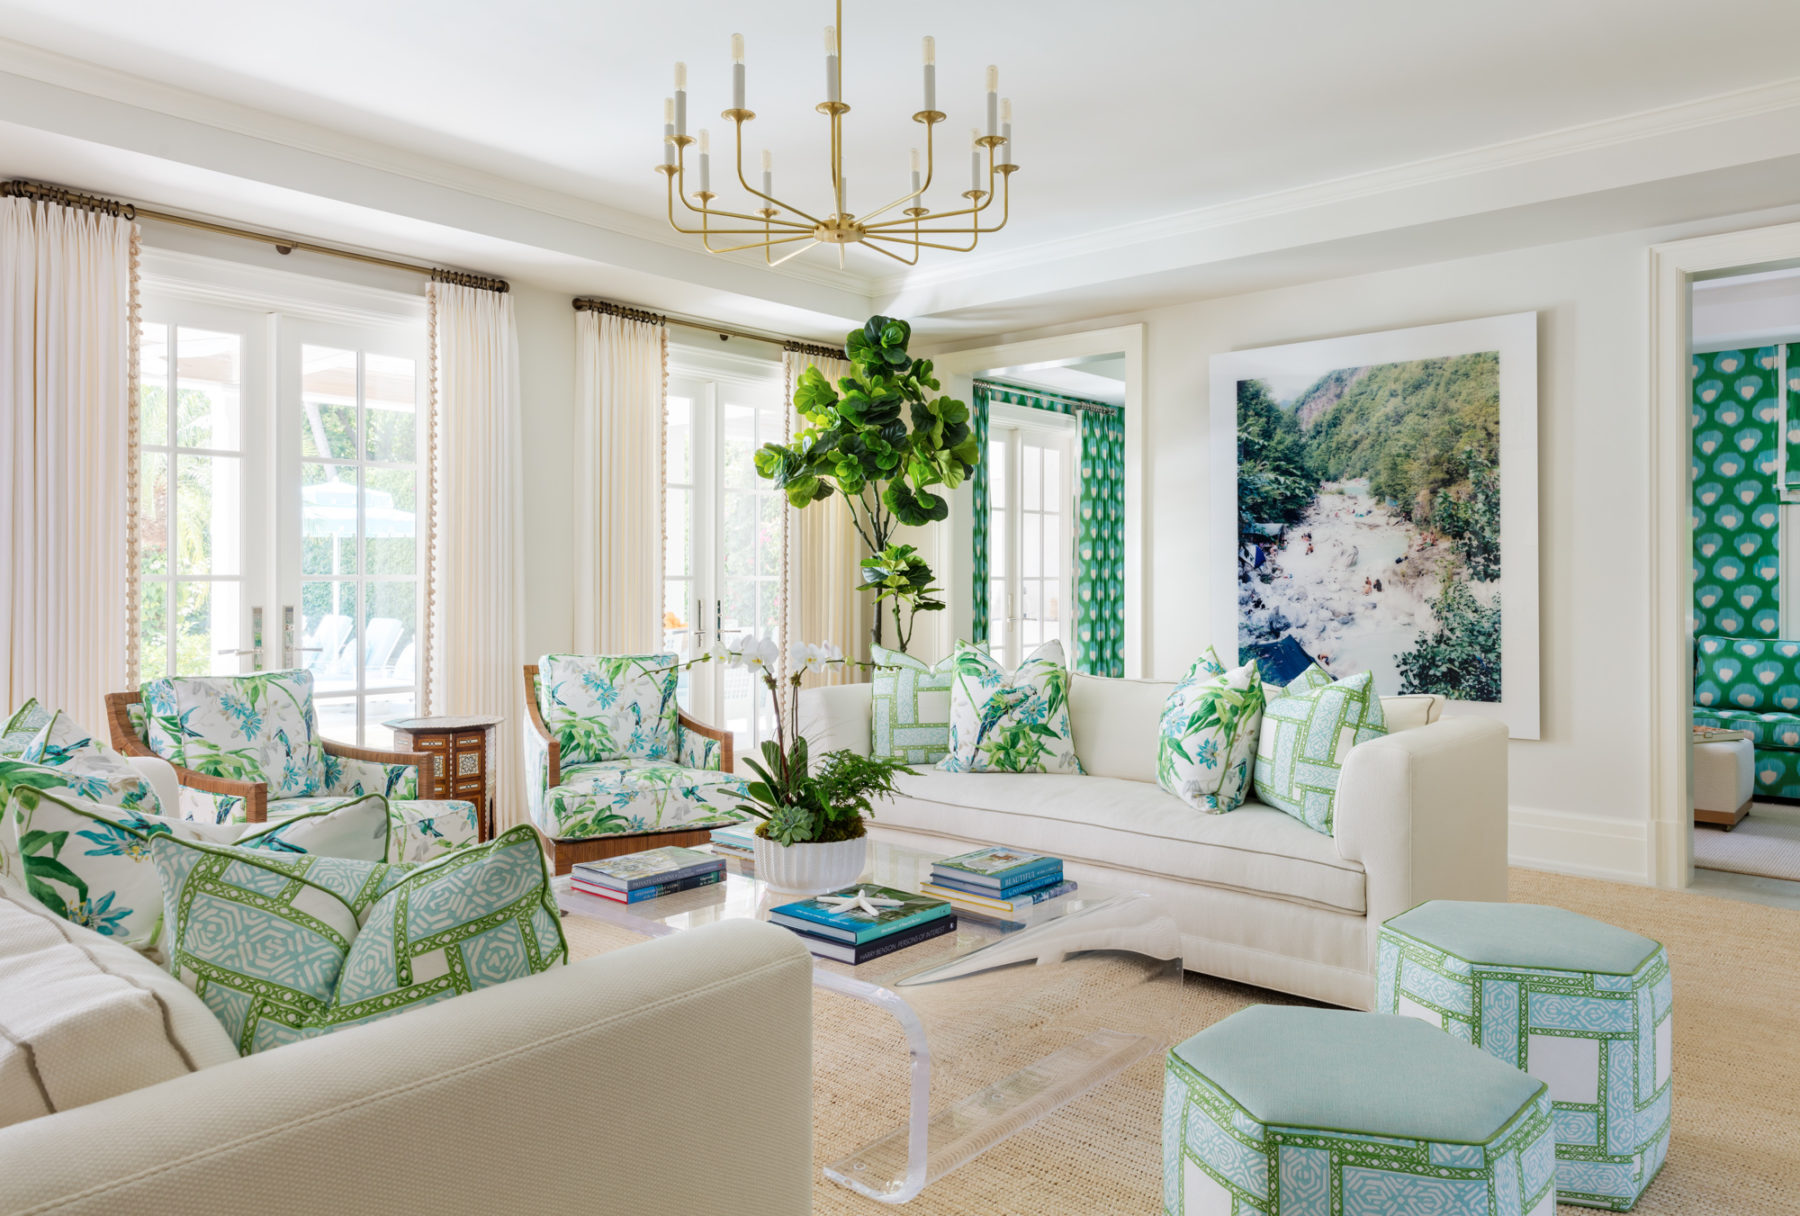 image of Tropical Oasis seating area with neutral sofas, walls, and curtains, with green and blue accessories